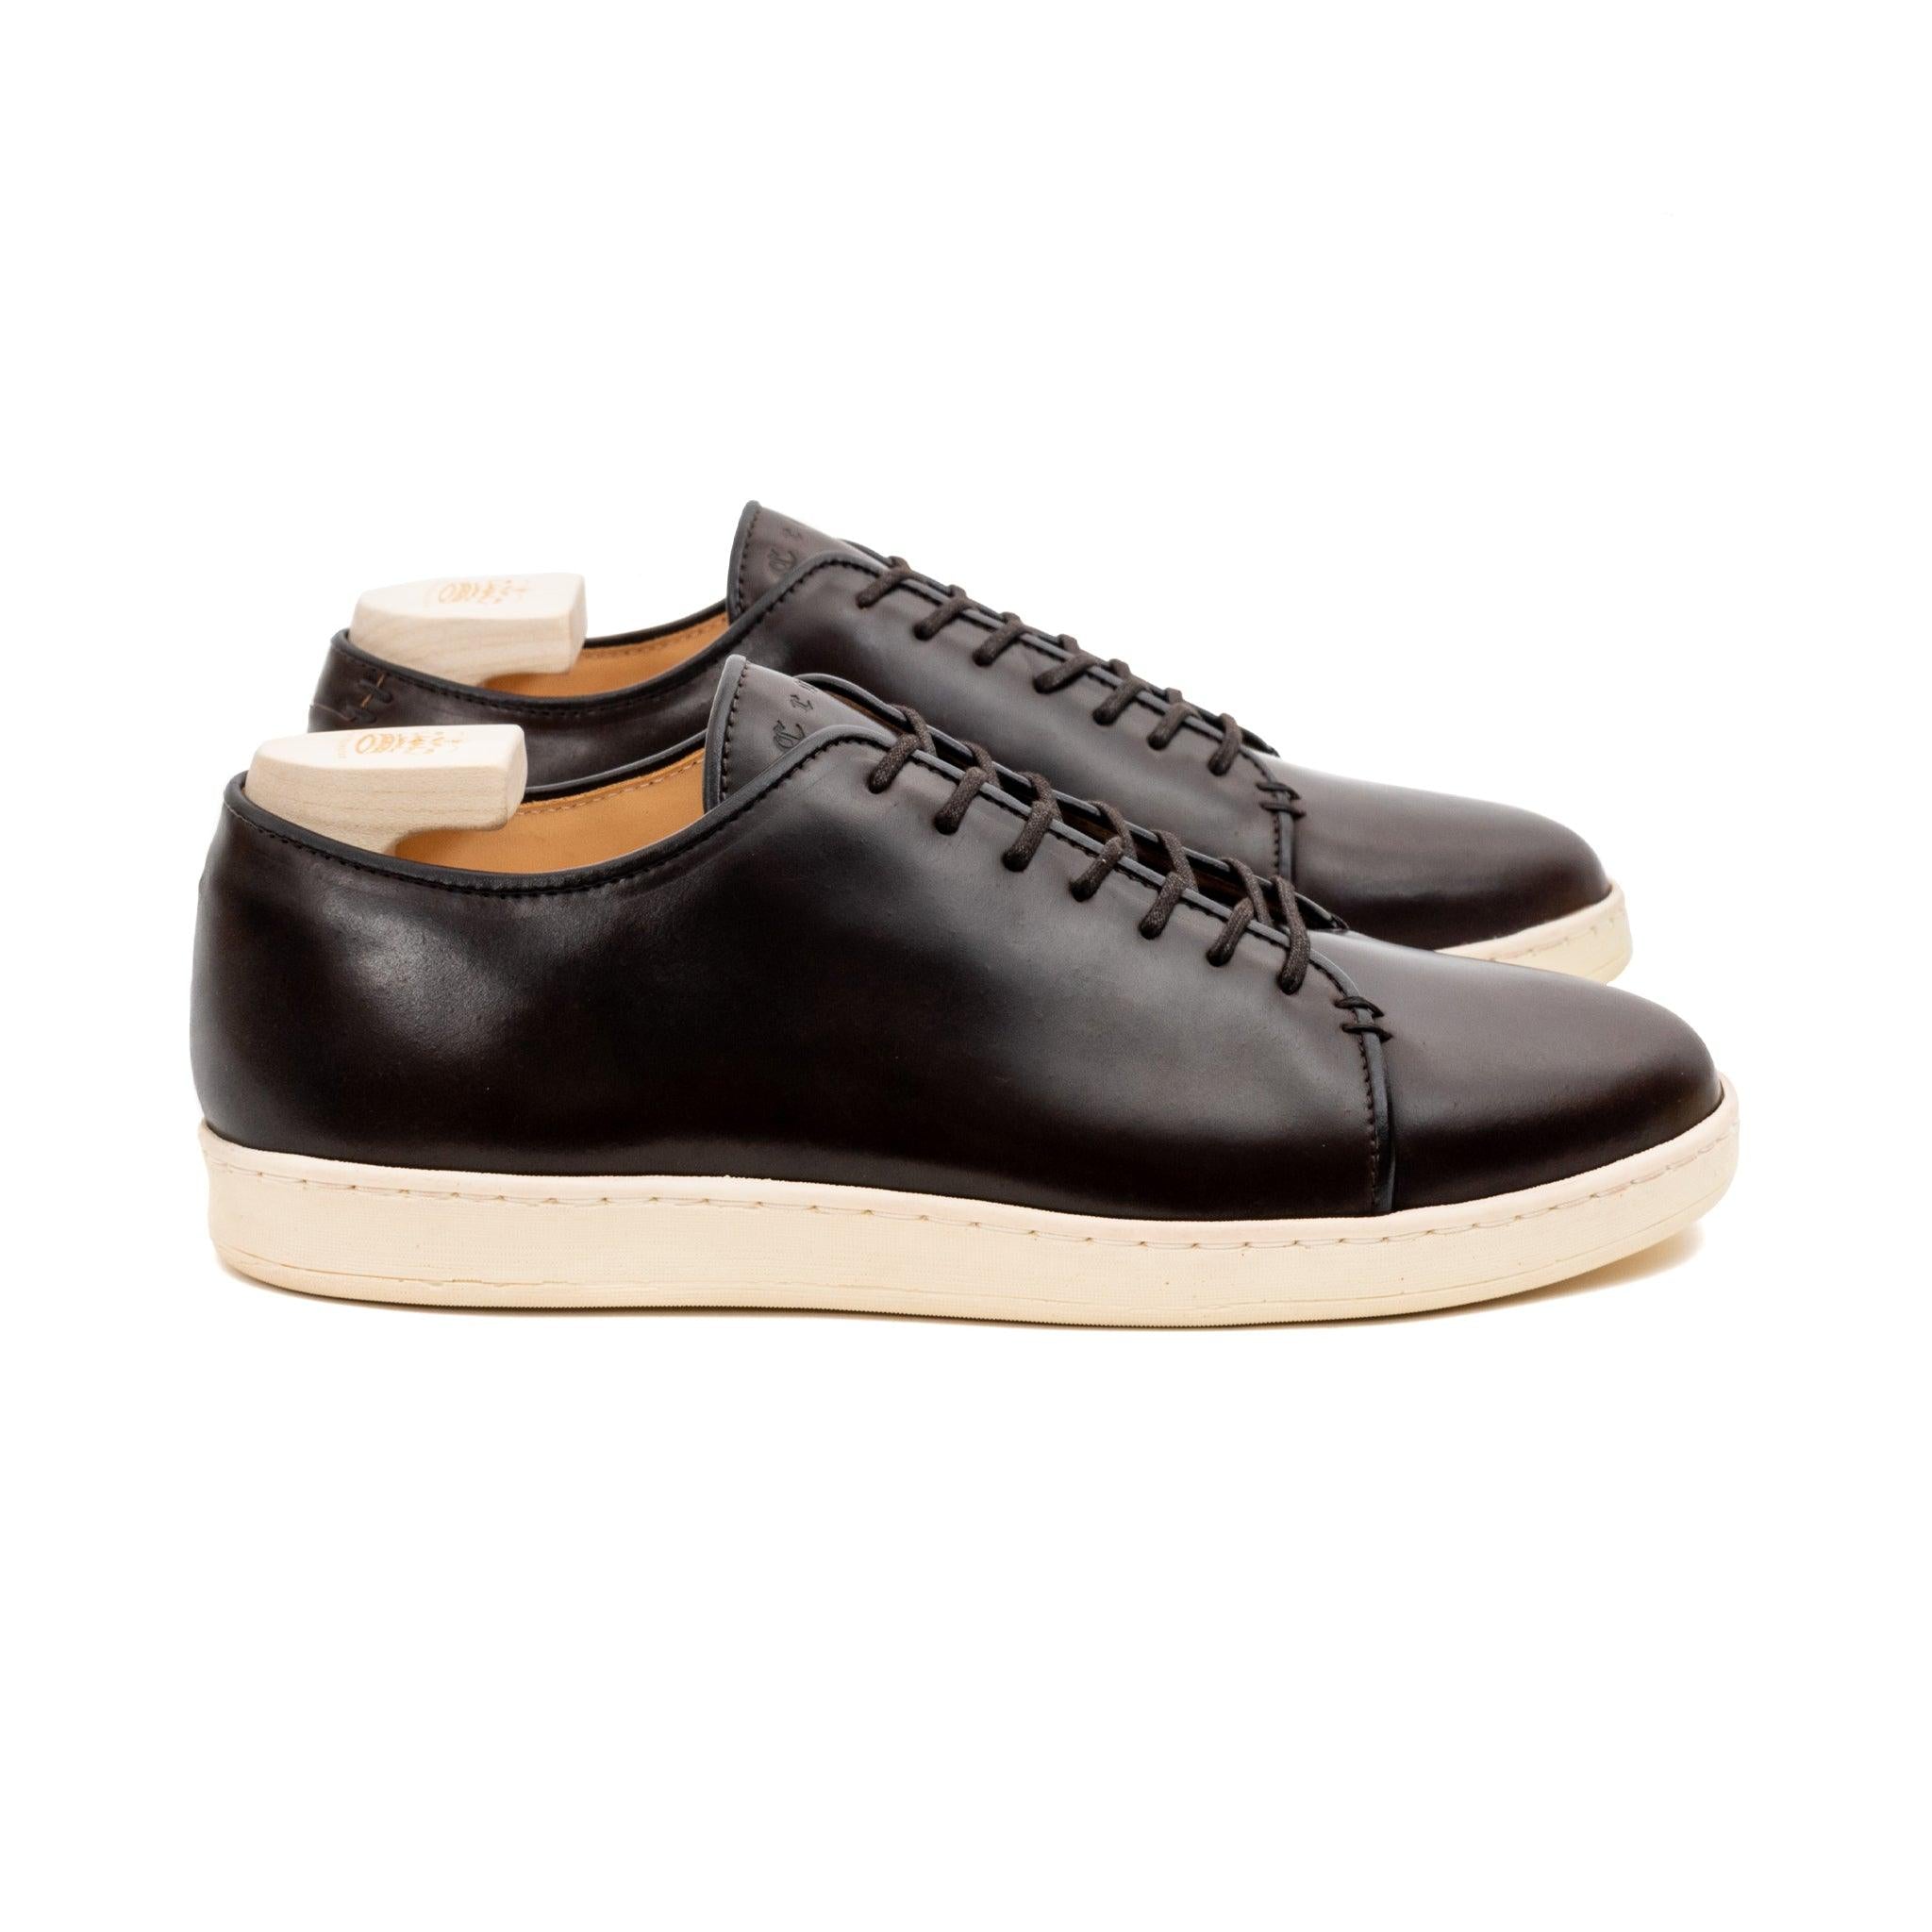 Leather Crown Made in Italy Tennis Shoes. | Tennis shoes, Leather, Shoes